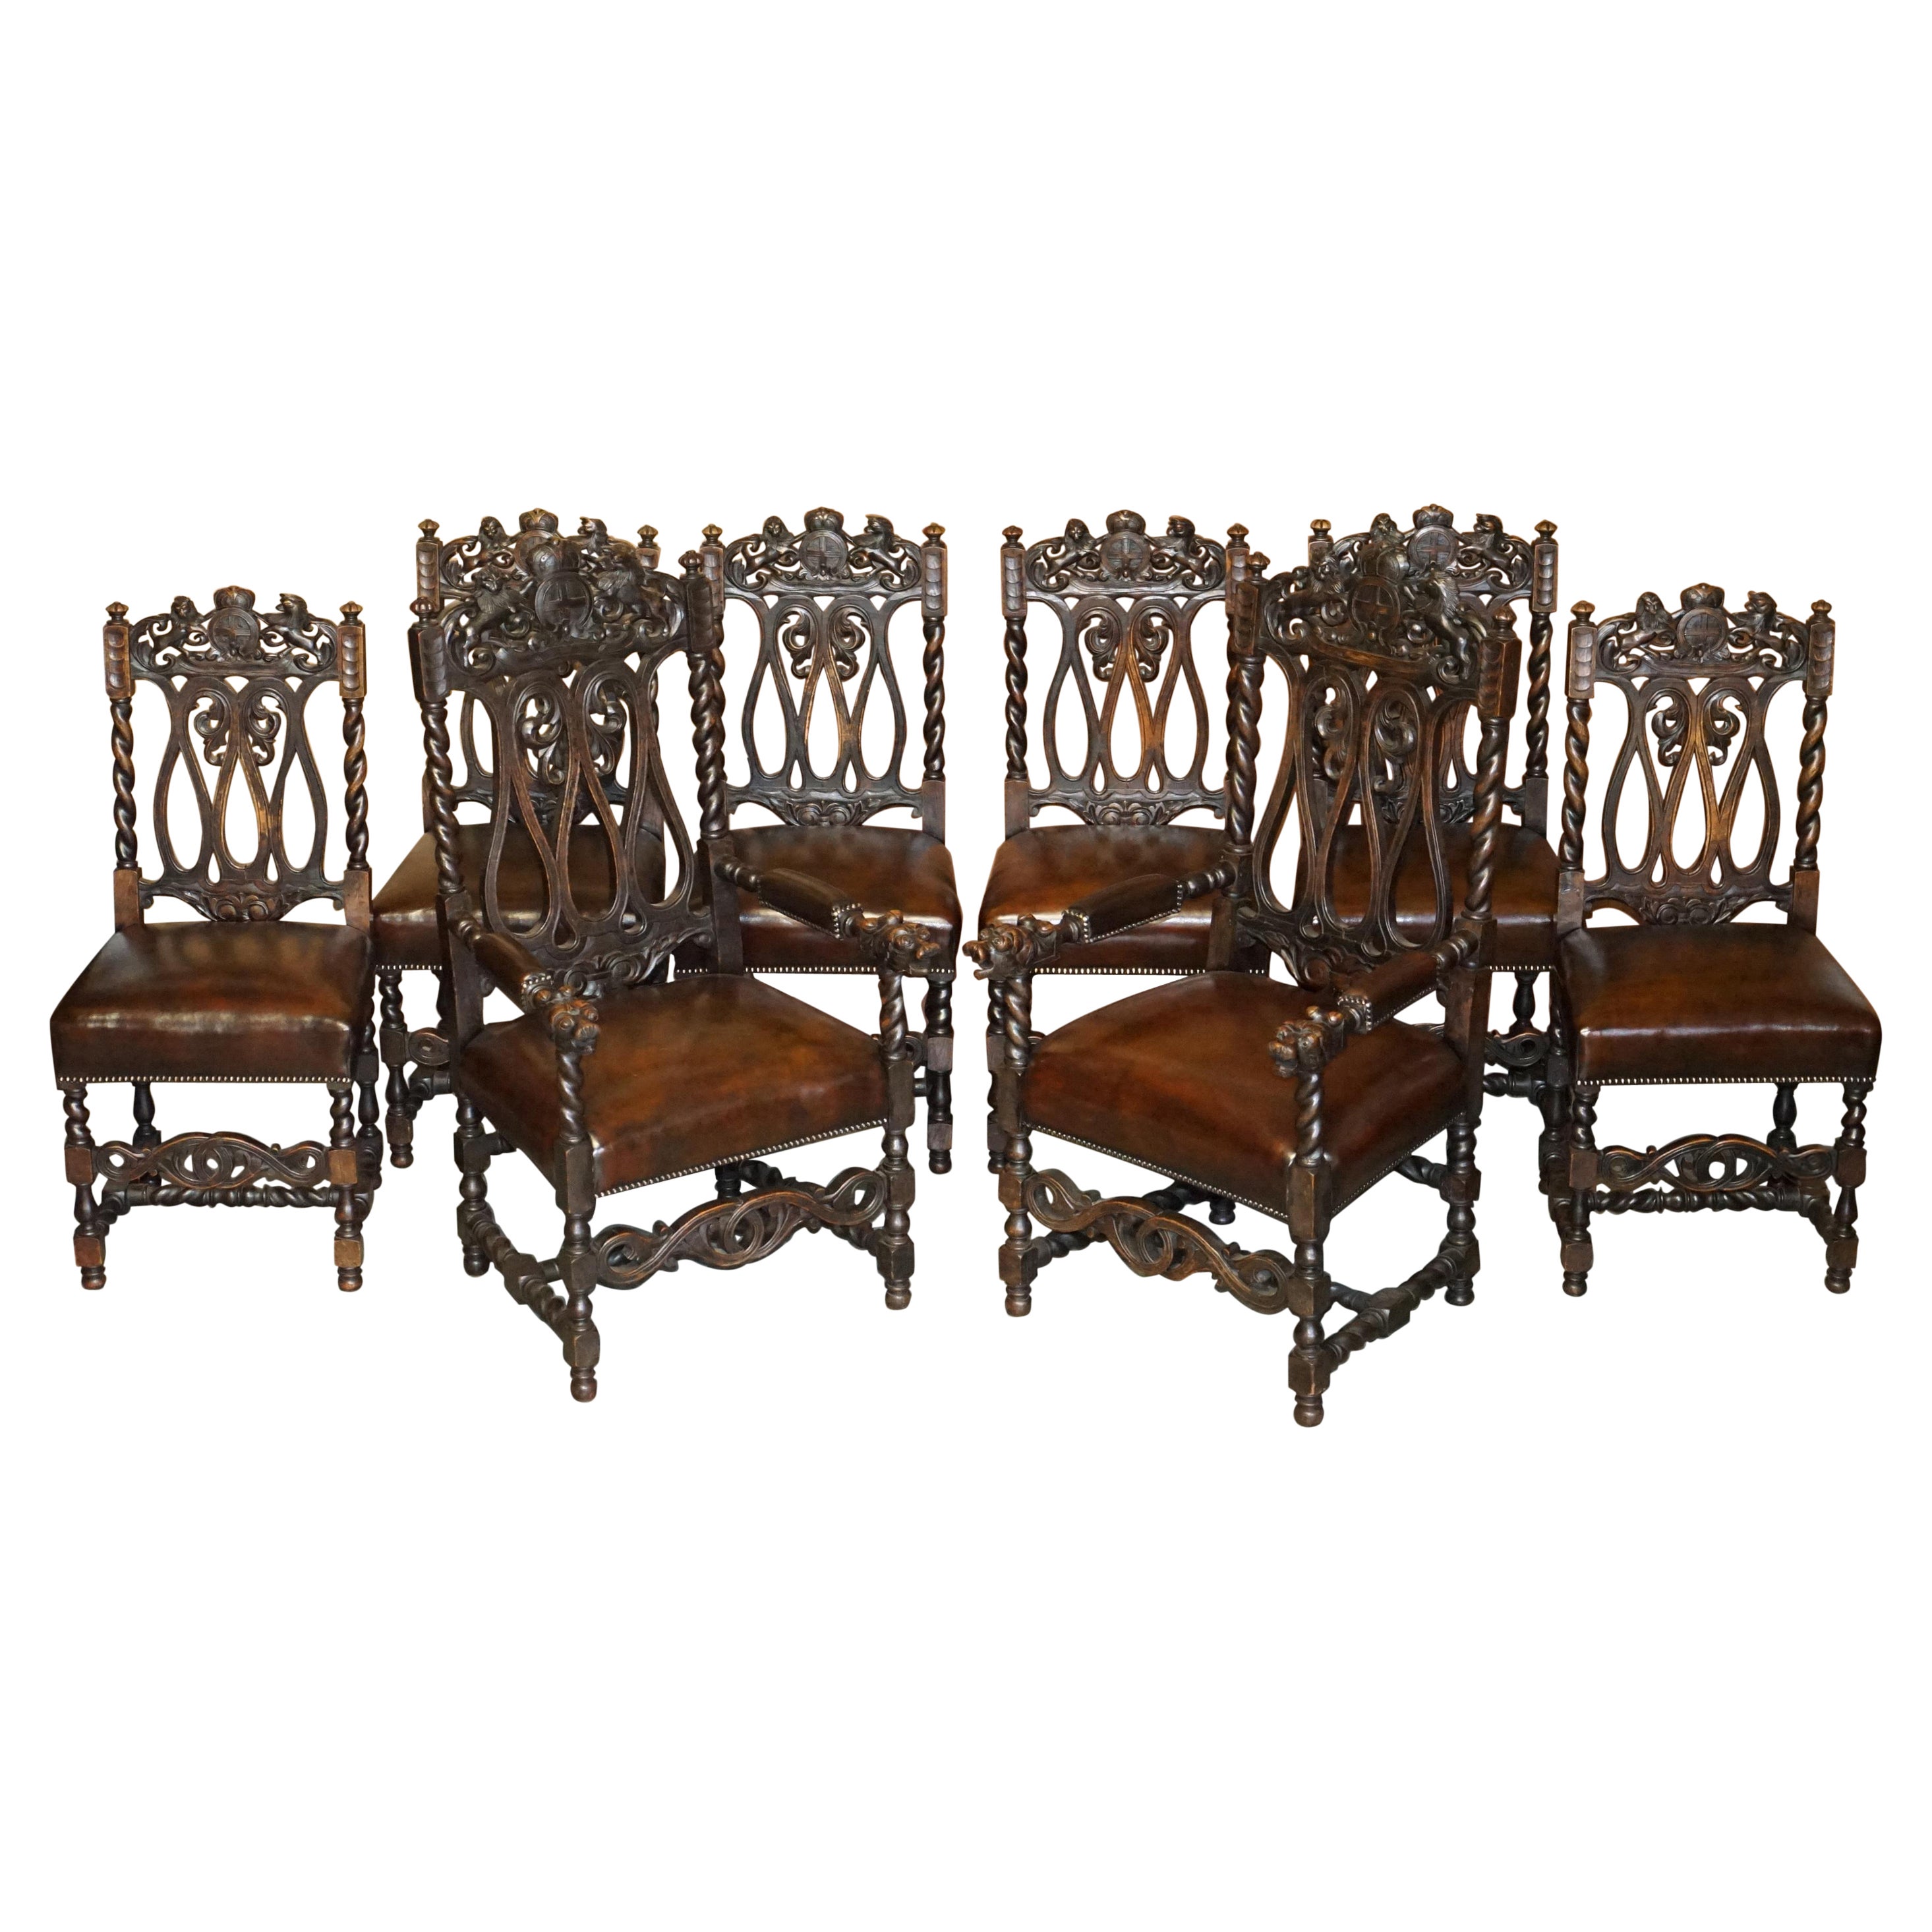 Eight Hand Carved Armorial Crest Coat of Arms Antique Jacobean Dining Chairs